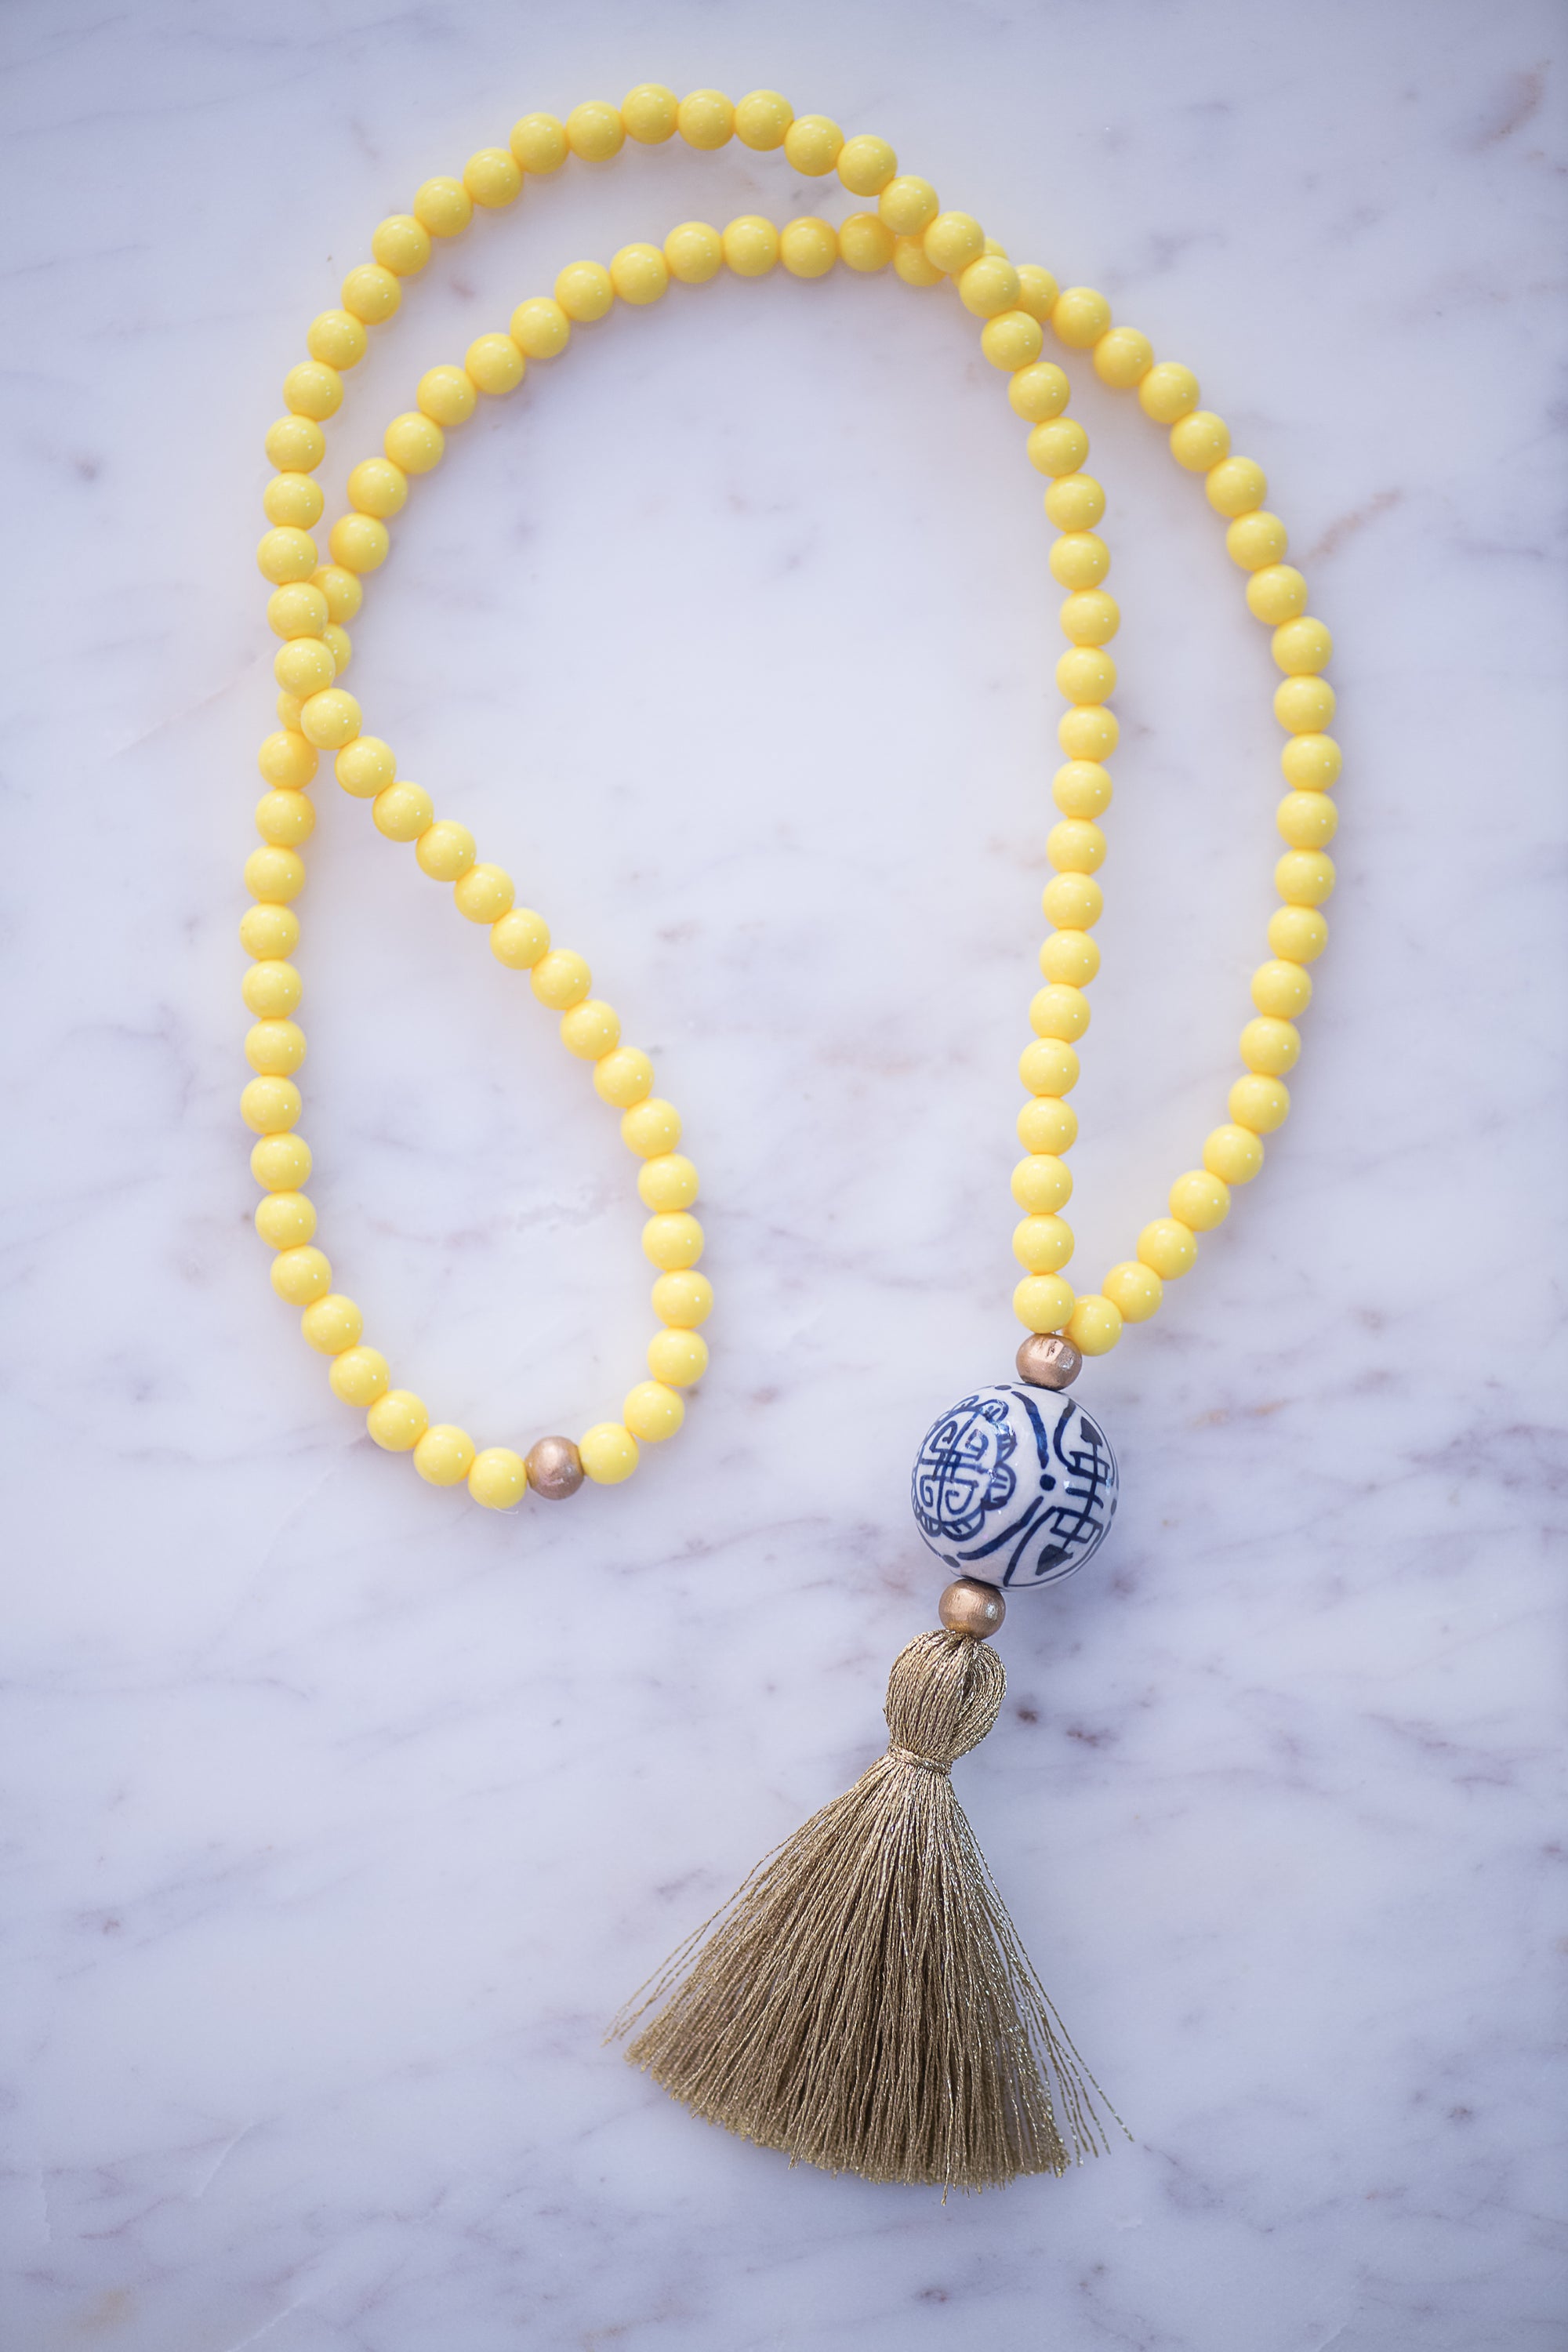 The Windermere Tassel Necklace